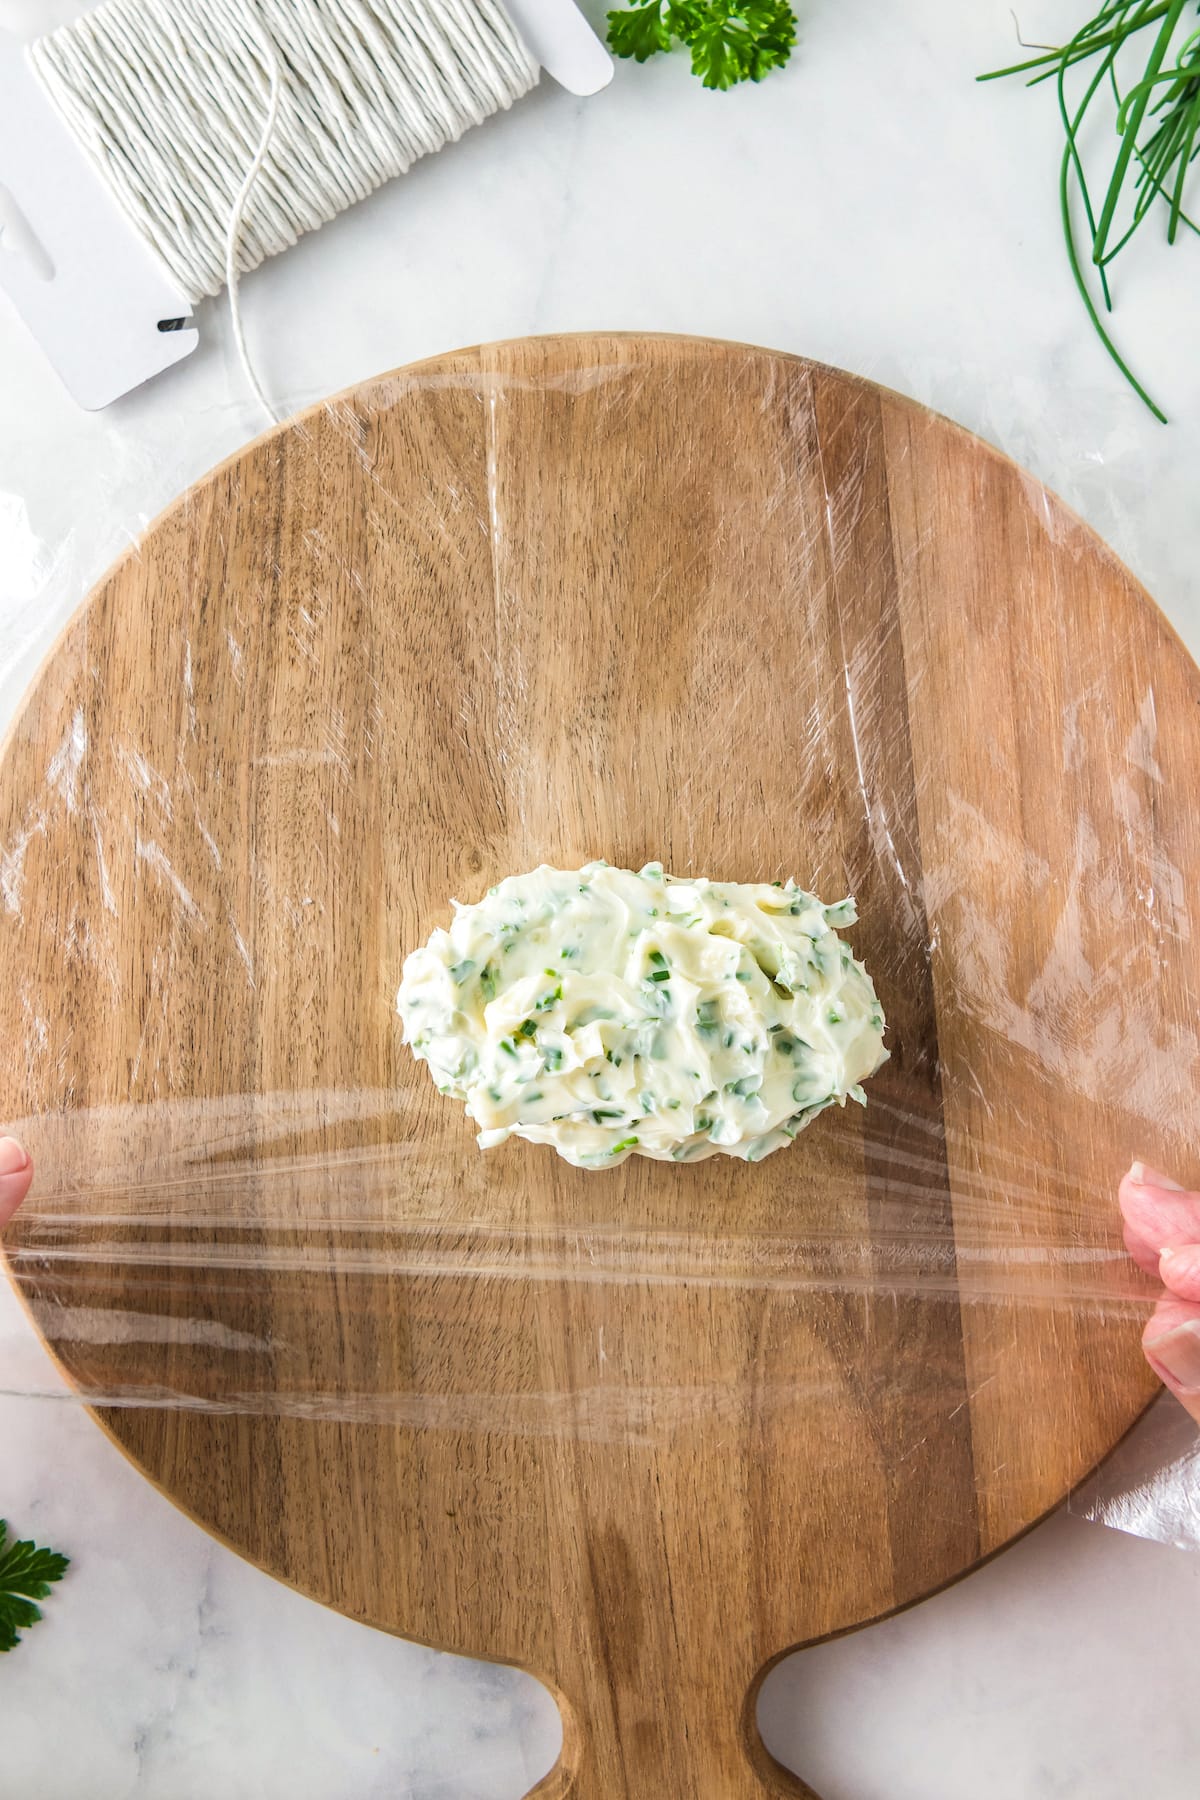 rolling herb garlic butter in plastic wrap